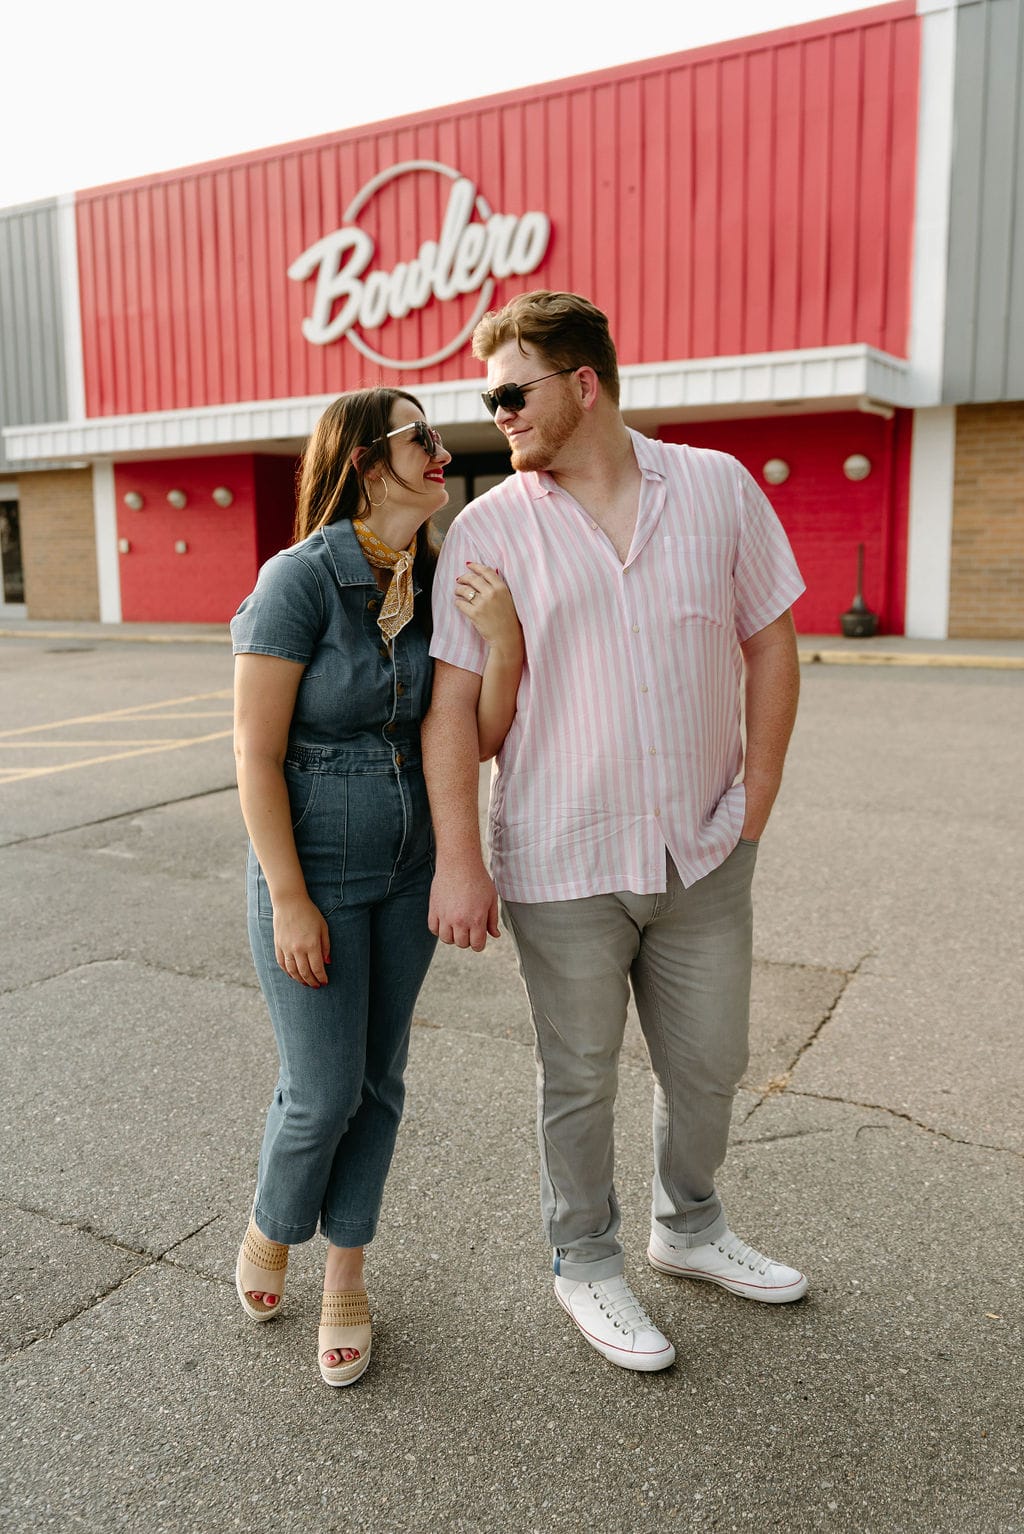 Bowling Alley Engagement Session at Bowlero